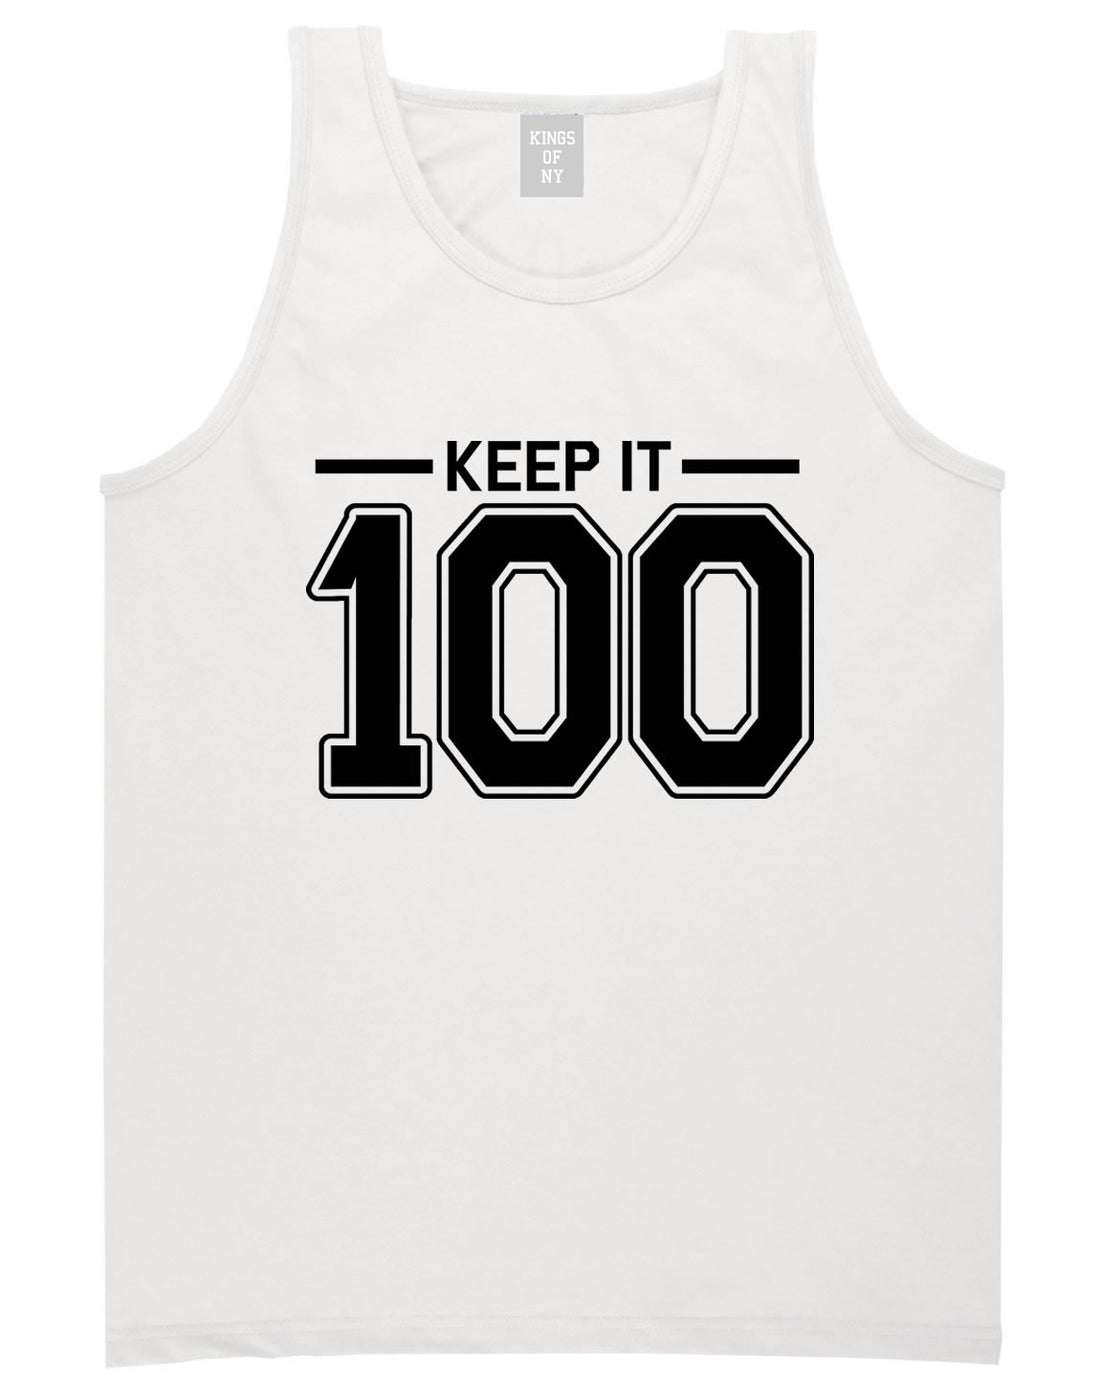 Keep It 100 Tank Top in White by Kings Of NY